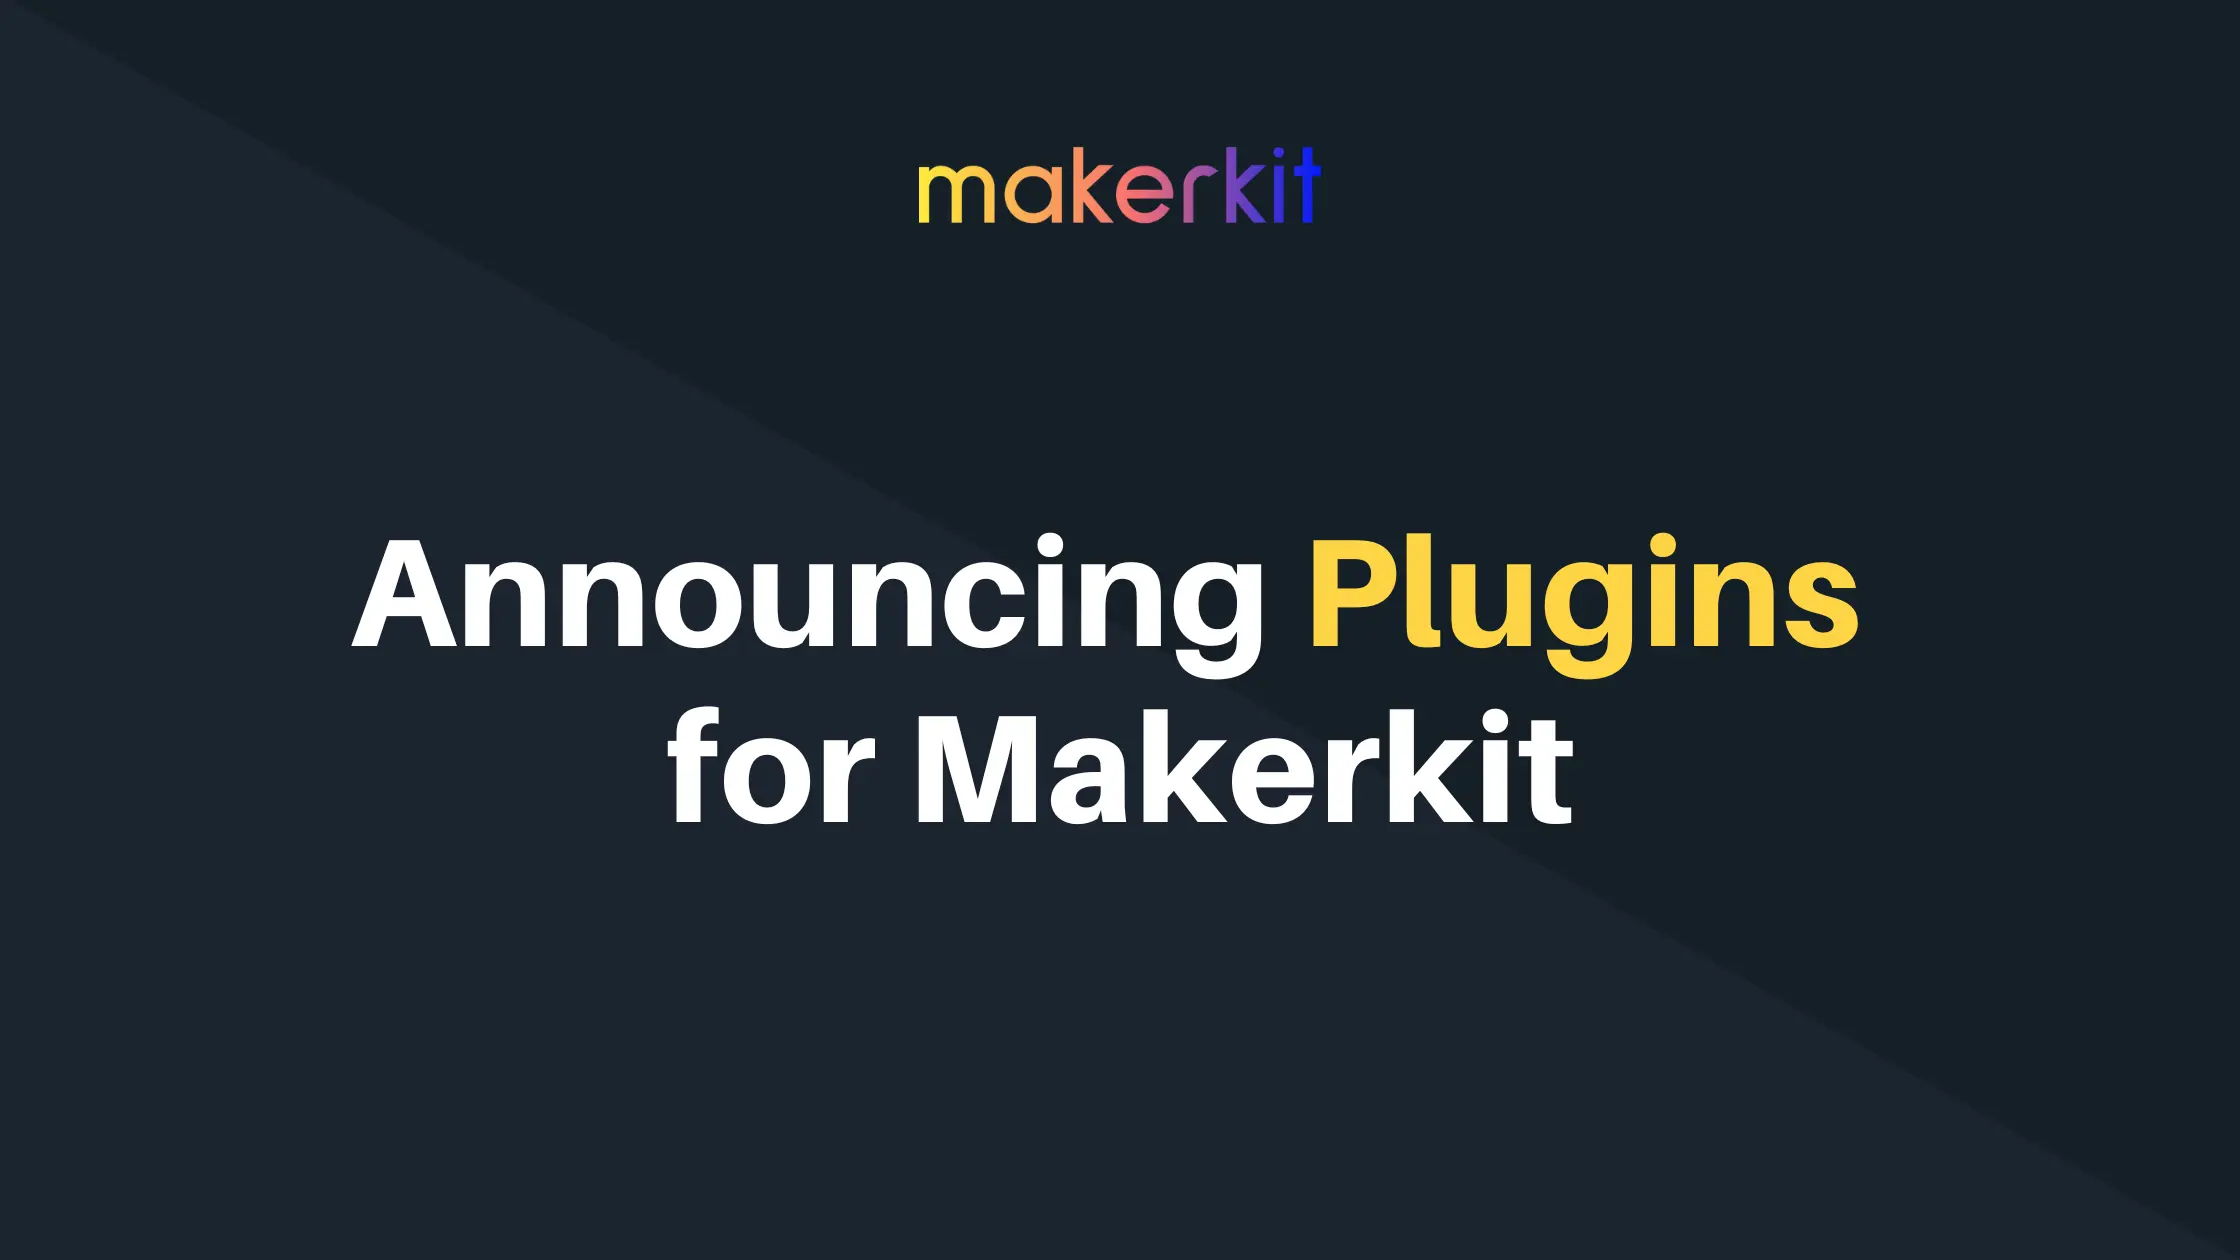 Cover Image for Announcing Plugins for Makerkit